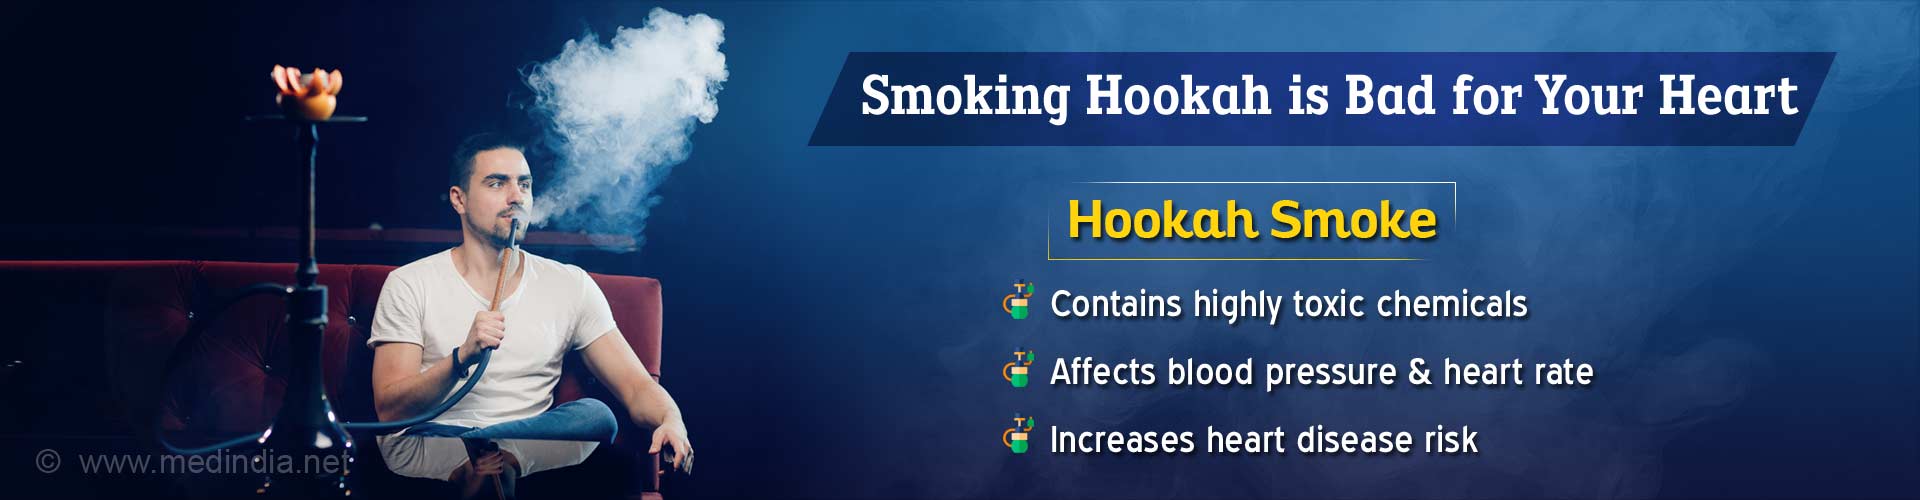 Smoking hookah is bad for your heart. Hookah smoke contains highly toxic chemicals, affects blood pressure & heart rate and increases heart disease risk.